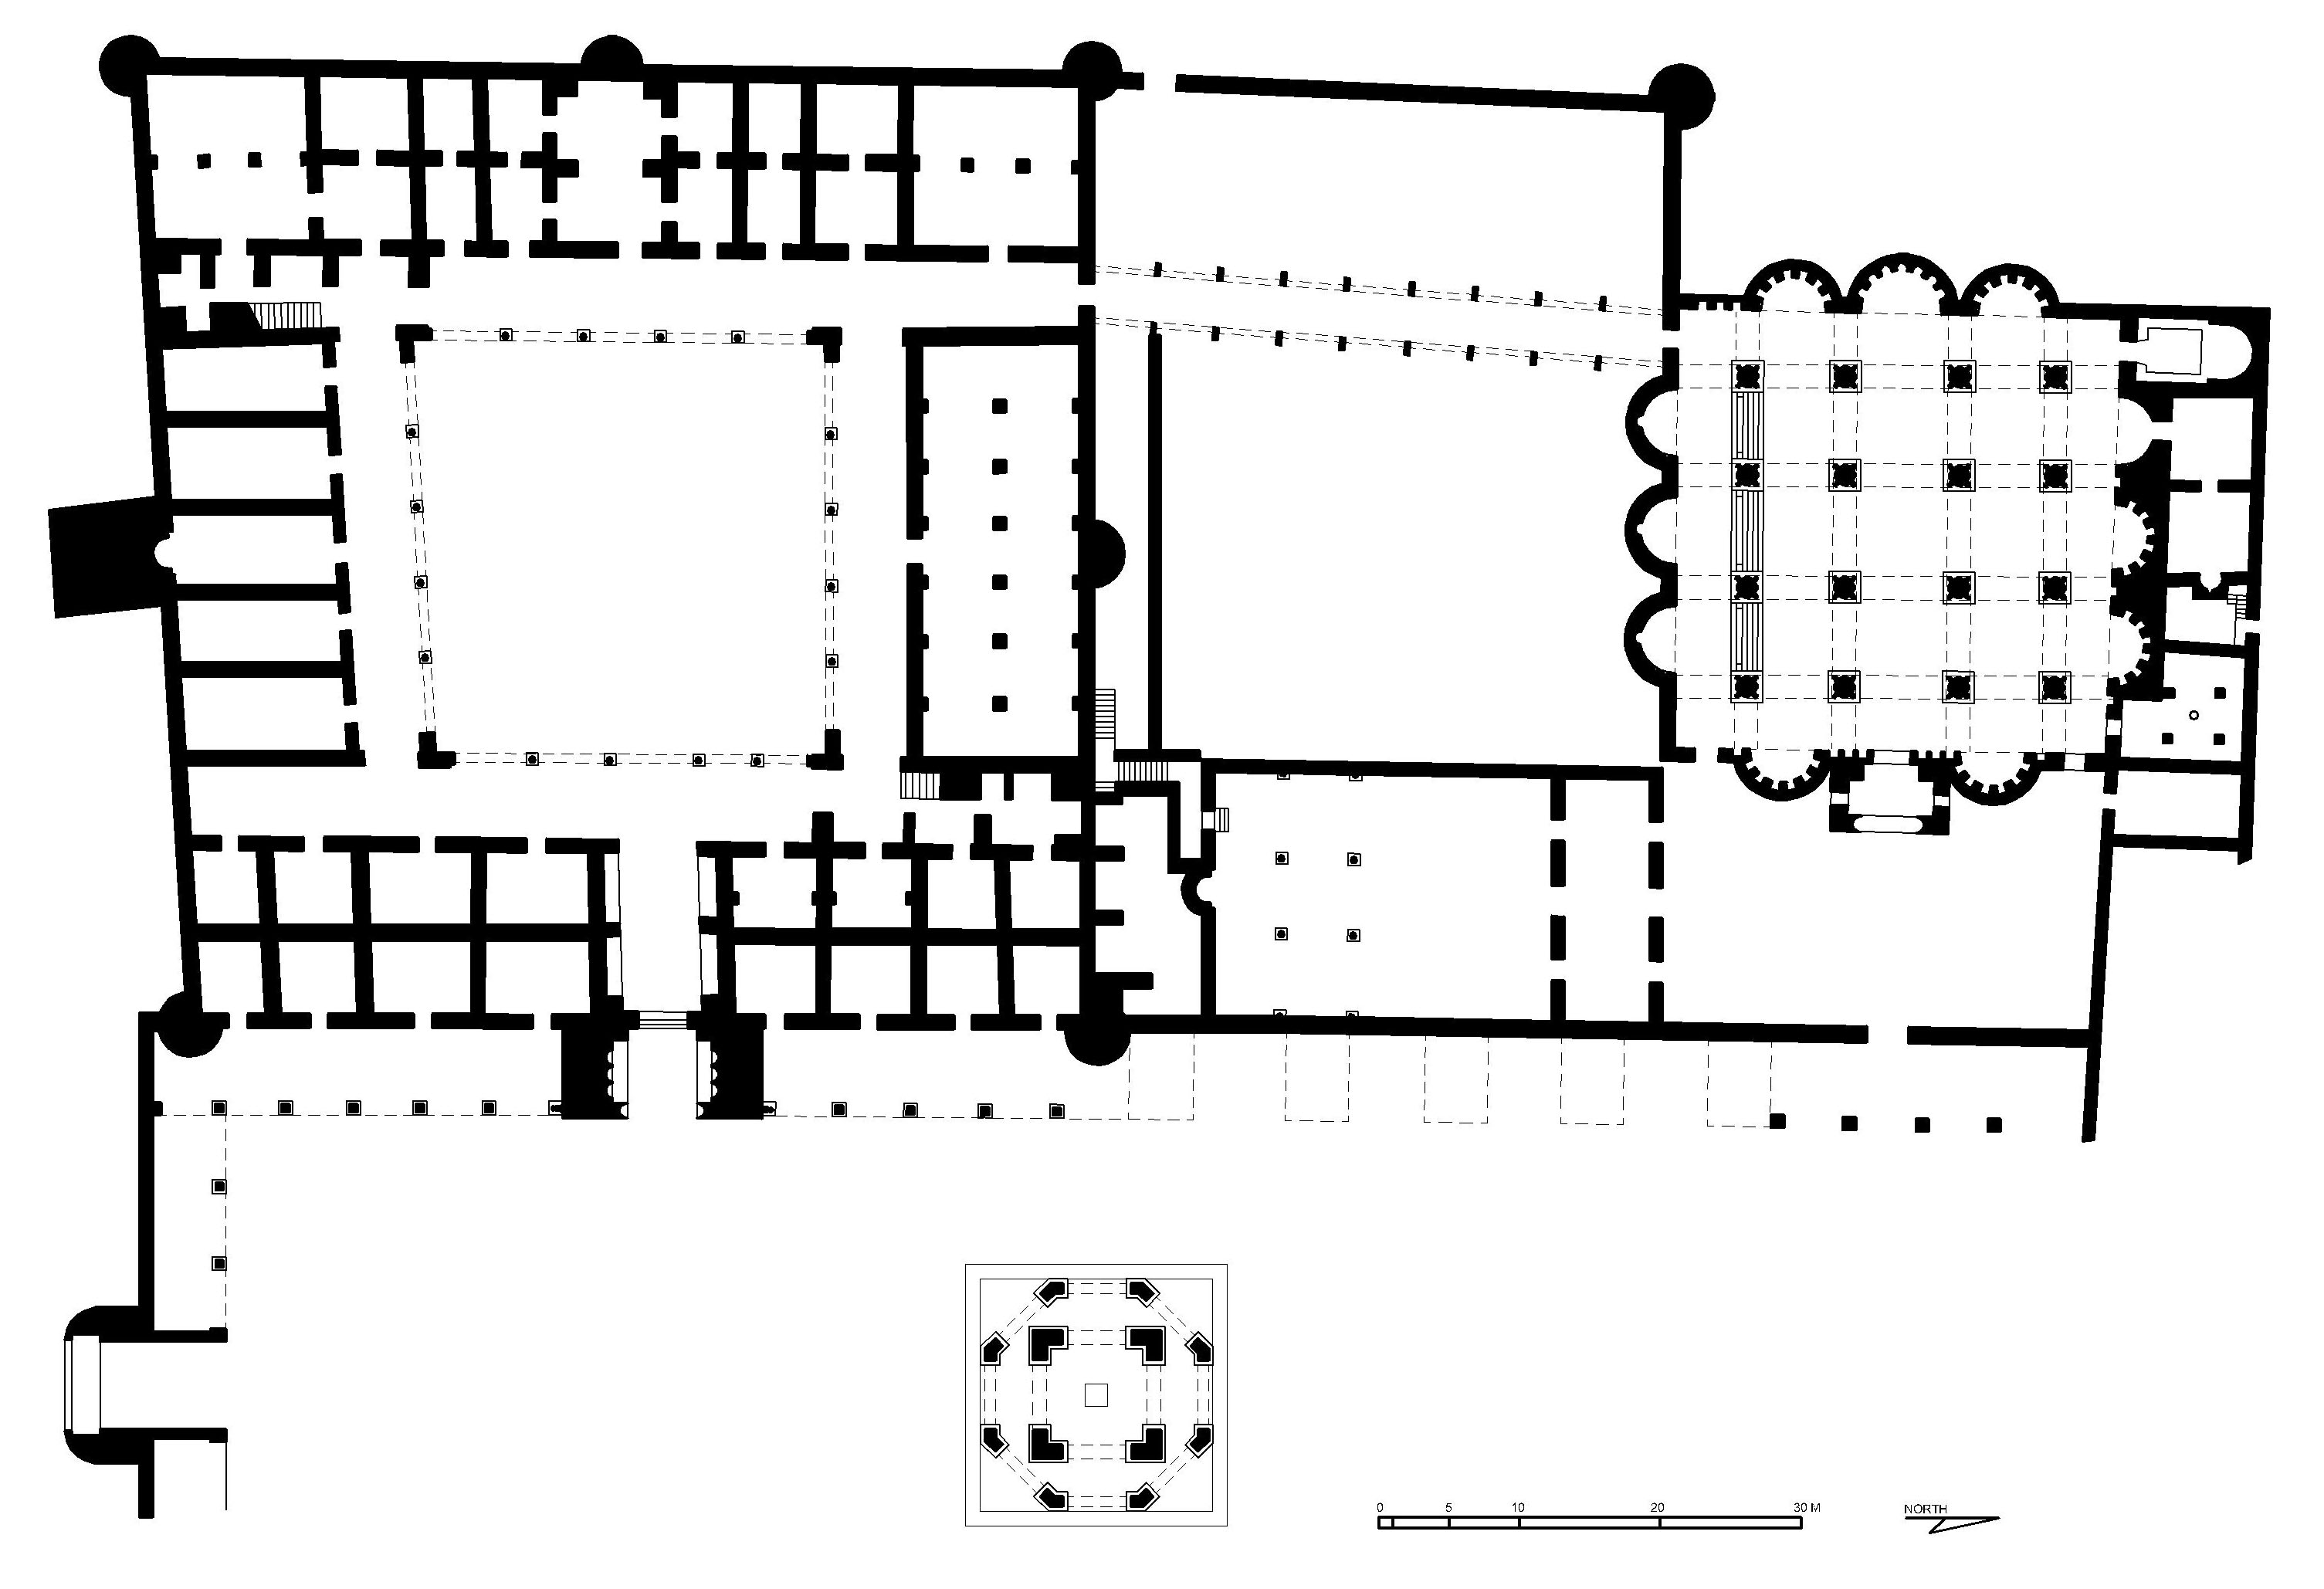 Khirbat al-Mafjar - Floor plan of palace in AutoCAD 2000 format. Click the download button to download a zipped file containing the .dwg file. 